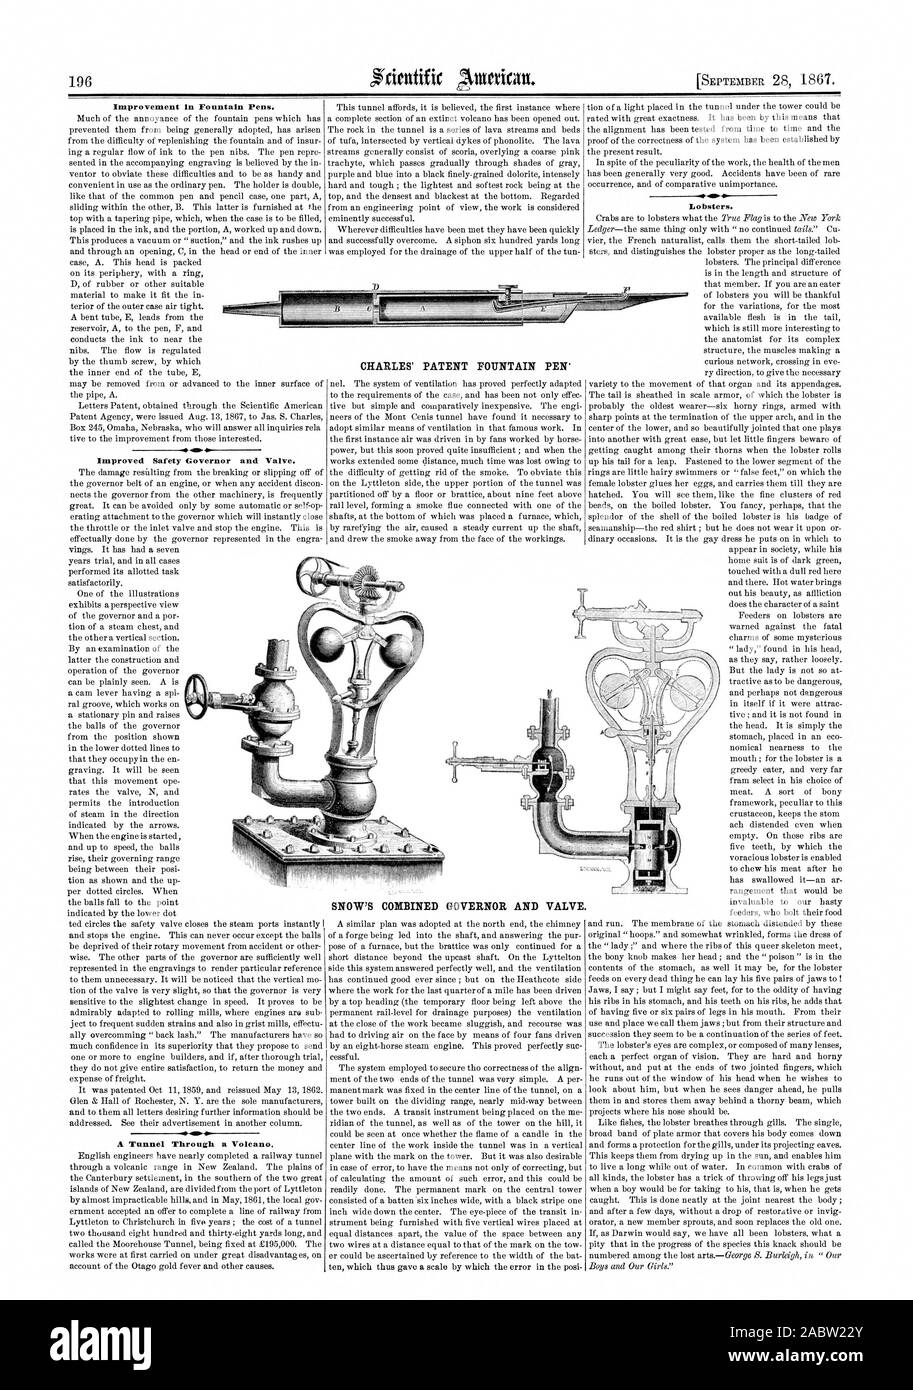 Improvement in Fountain Pens. Improved Safety Governor and Valve. A Tunnel Through a Volcano. CHARLES' PATENT FOUNTAIN PEN' SNOW'S COMBINED GOVERNOR AND VALVE. Lobsters., scientific american, 1867-09-28 Stock Photo